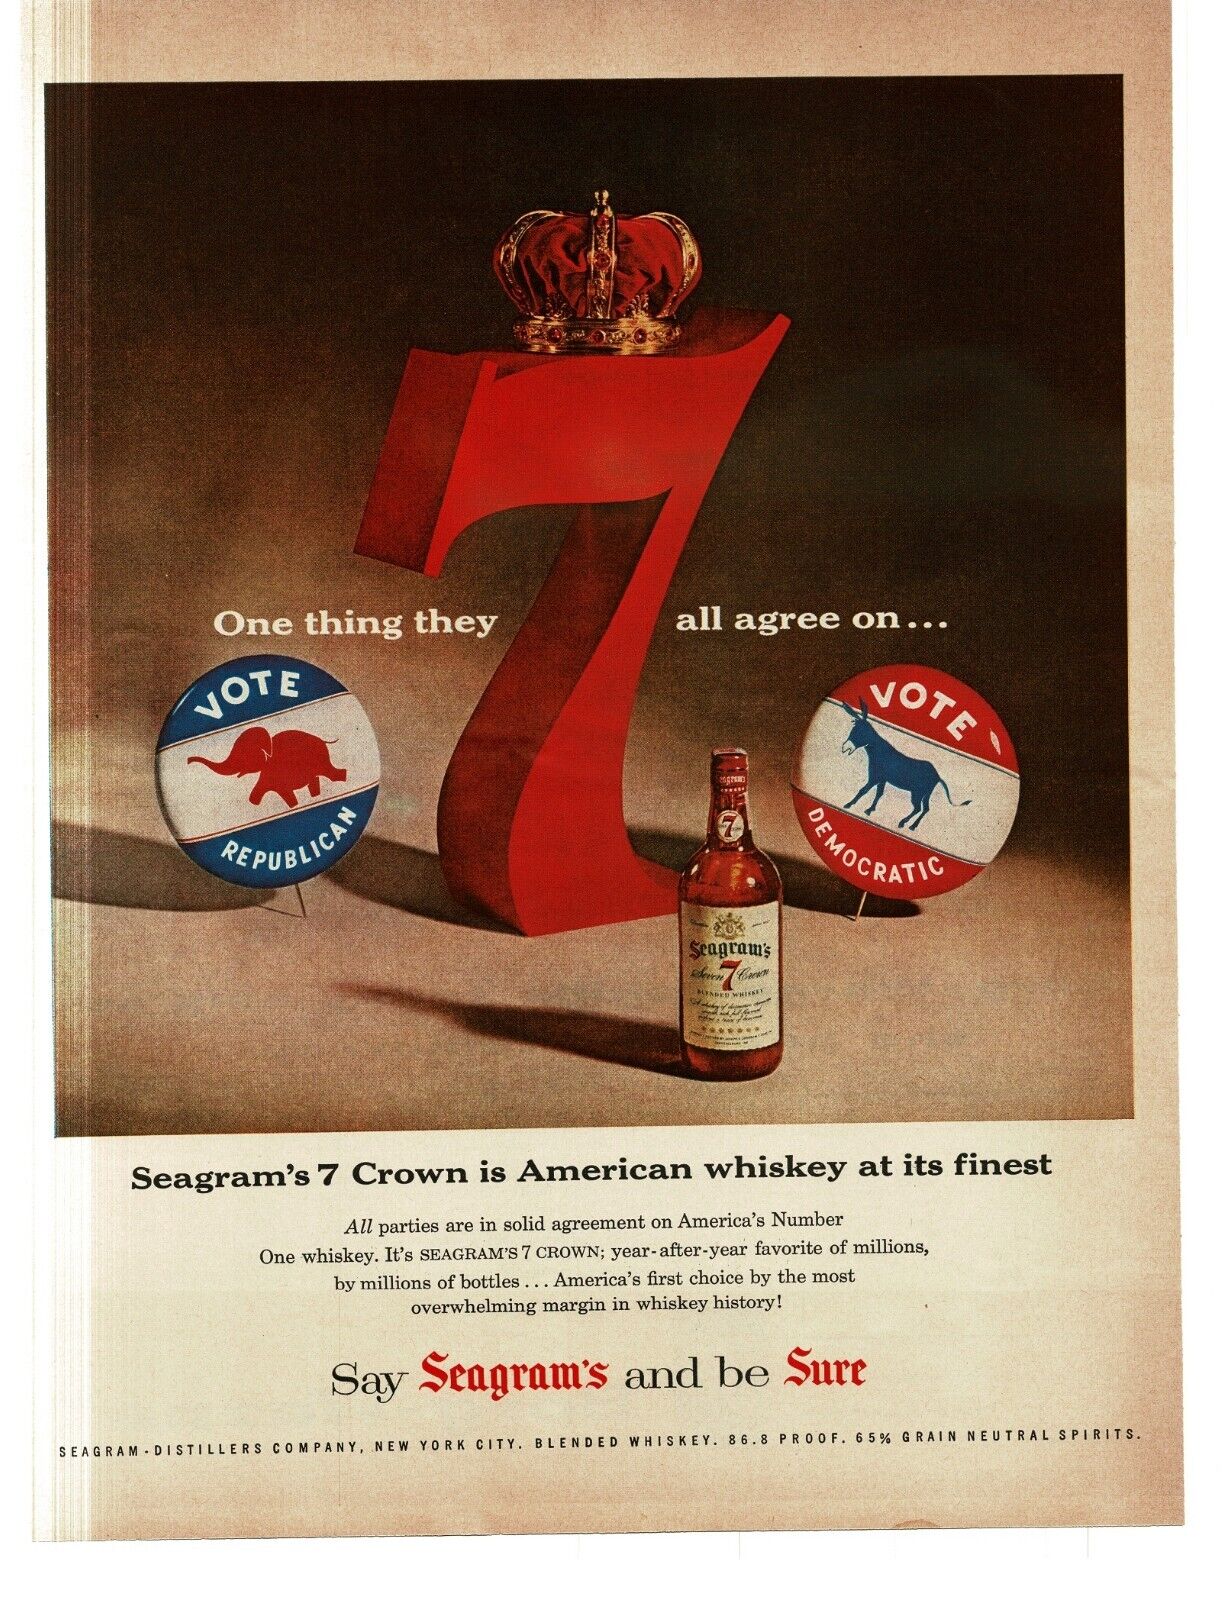 1956 Seagram's Seven Crown Whiskey big red 7 political buttons Vintage Print Ad